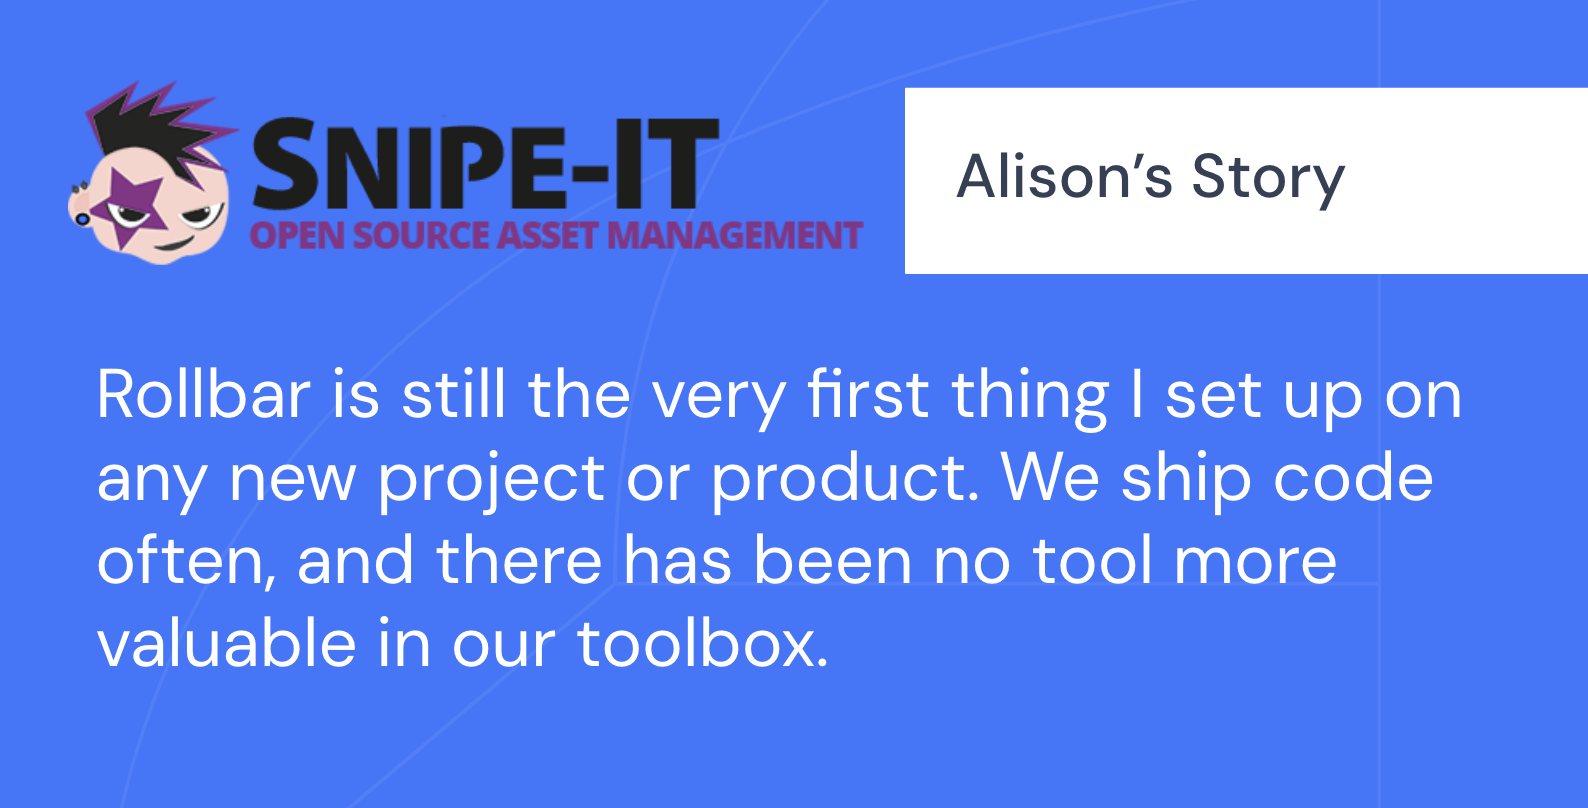 Alison’s story with Rollbar